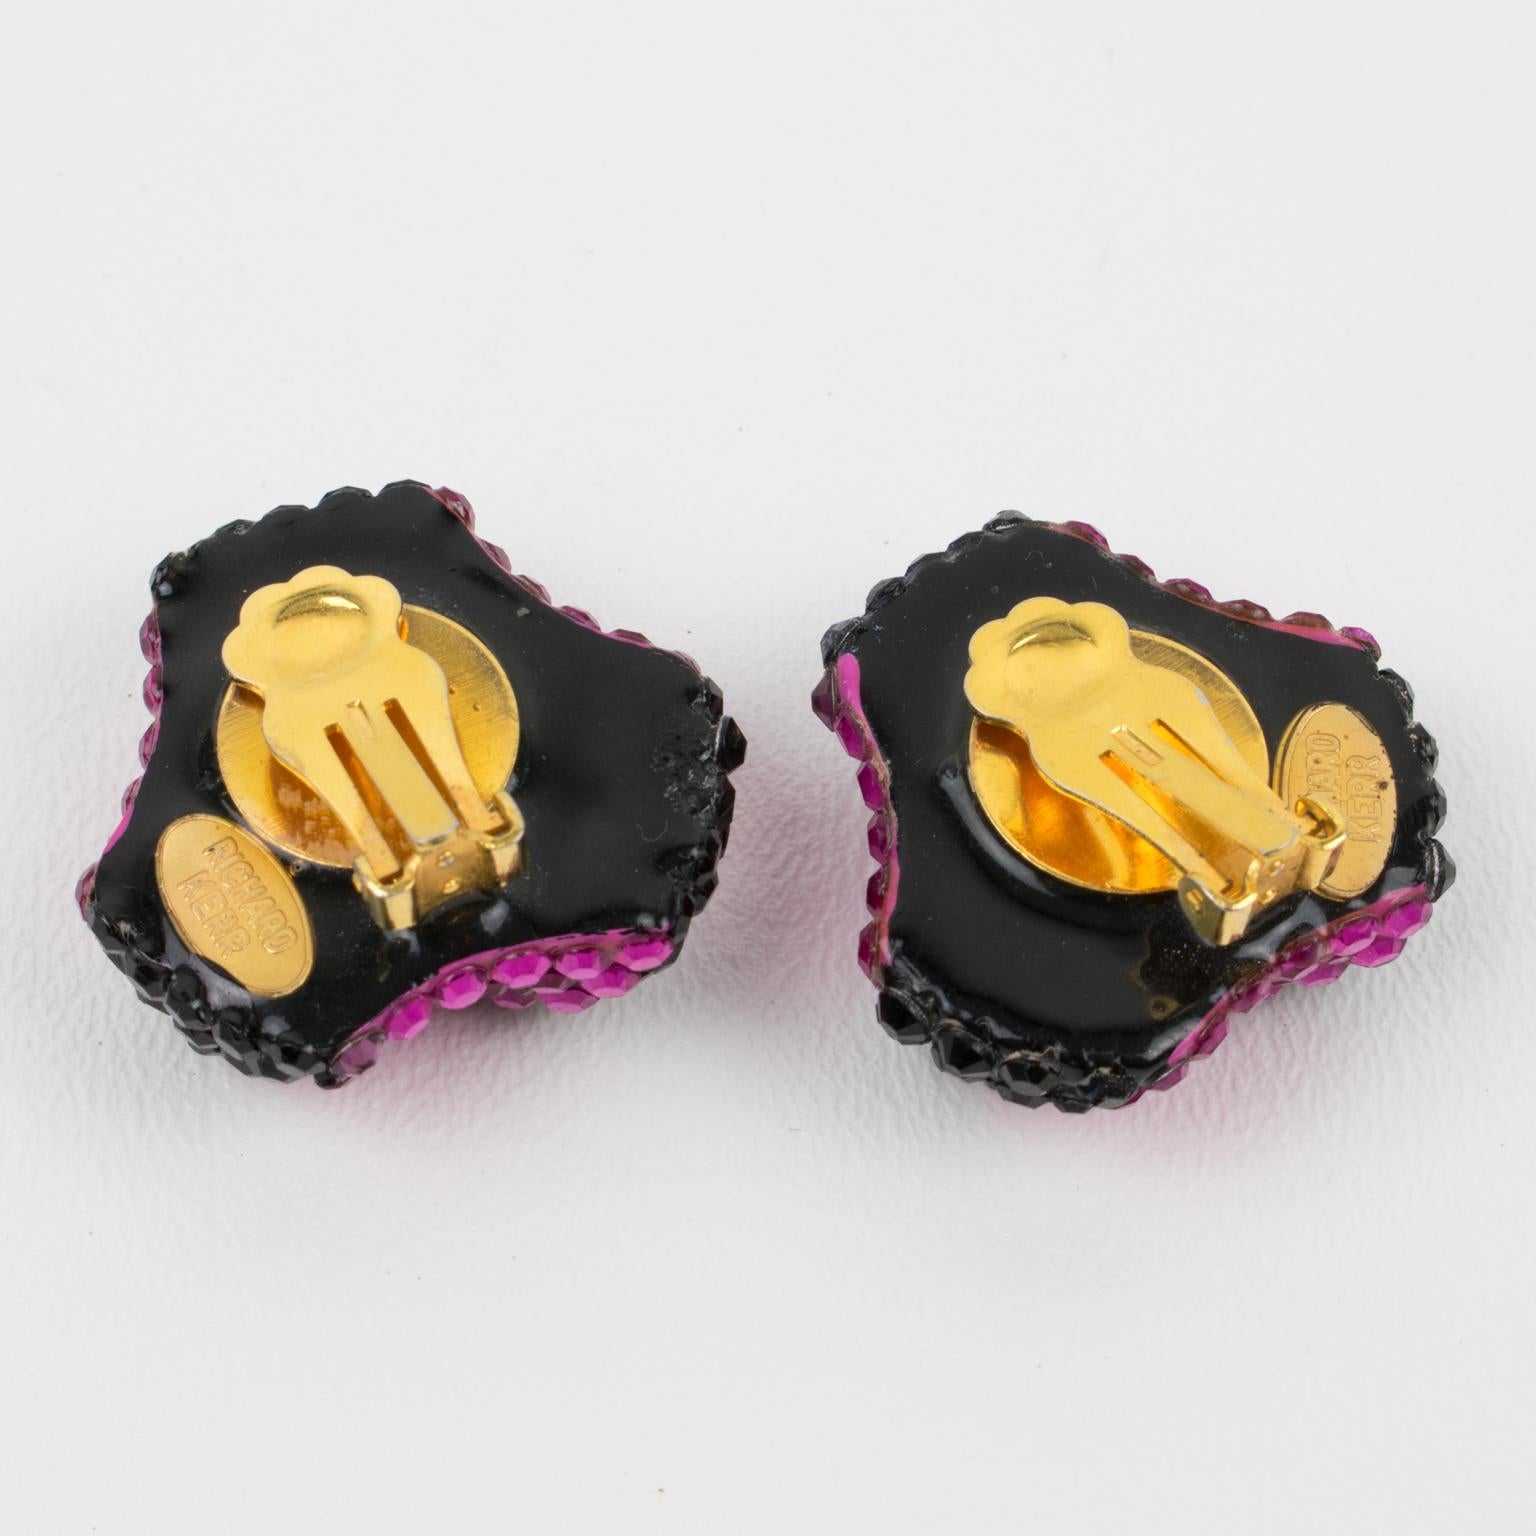 Richard Kerr Clip Earrings Black and Fuchsia Crystal Jeweled Paved In Excellent Condition For Sale In Atlanta, GA